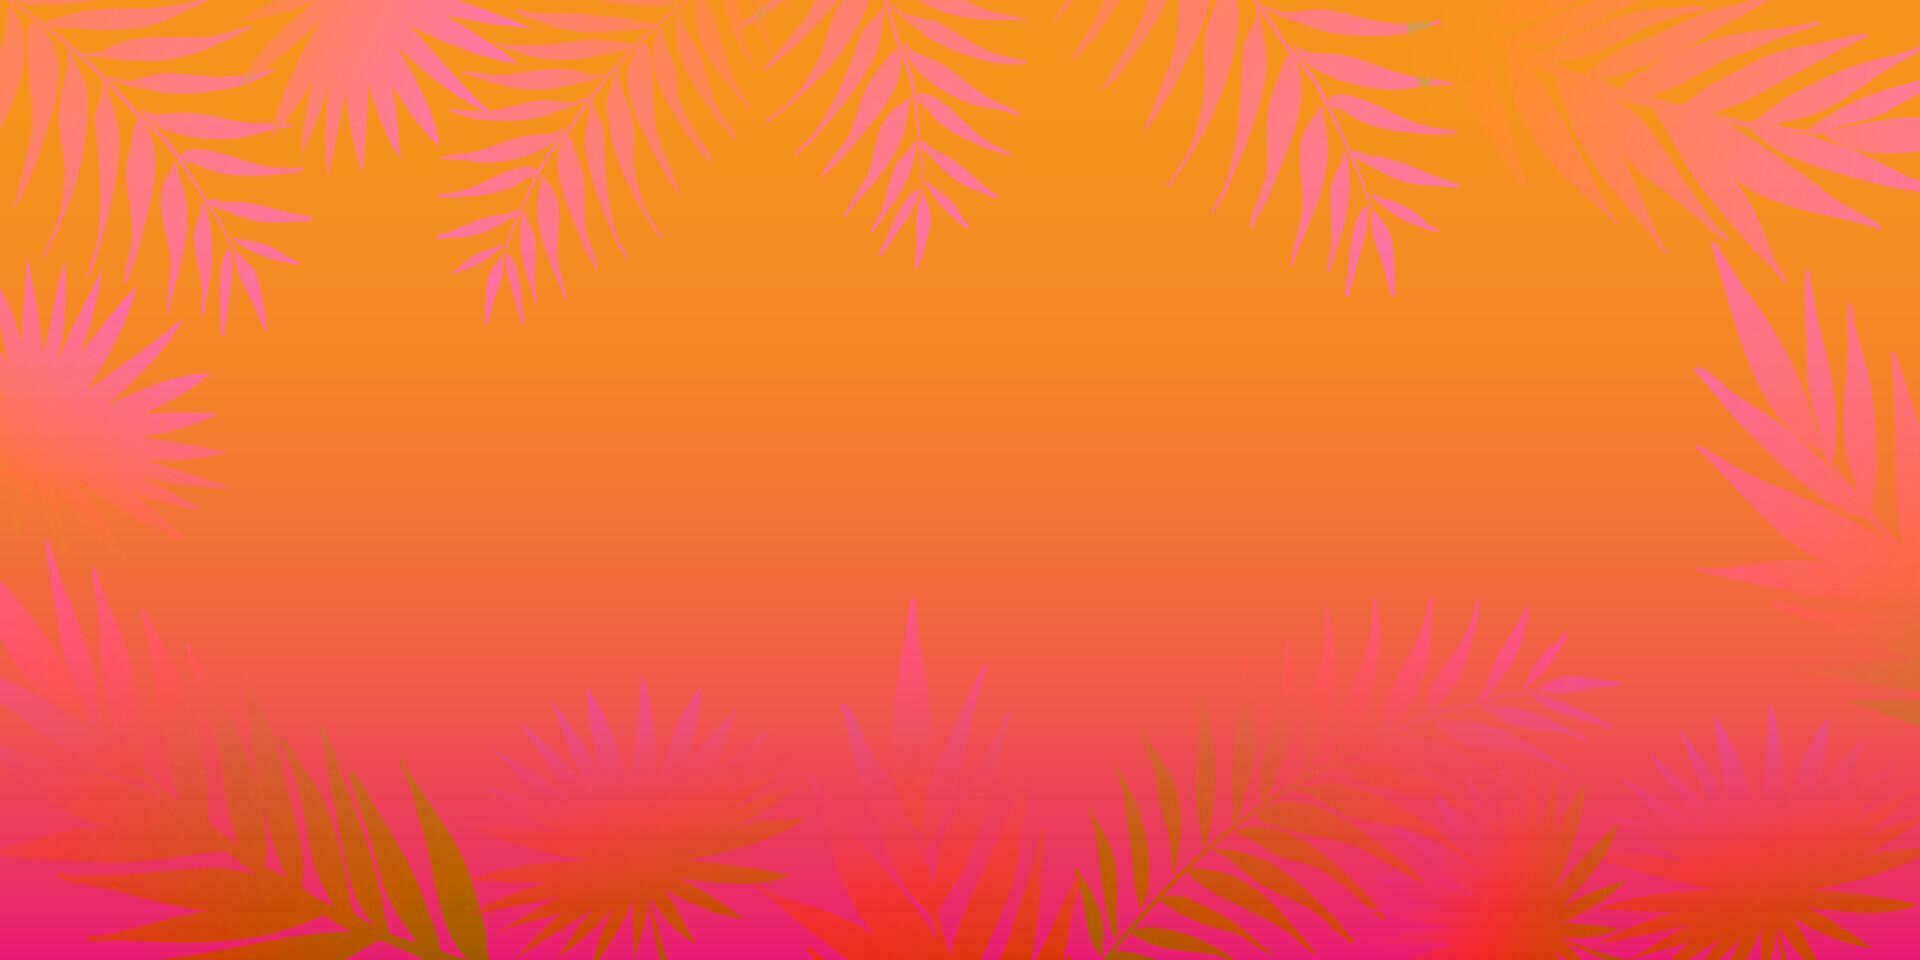 Colorful Summer background layout banners design with palm leaves. Pink and orange colors. vector